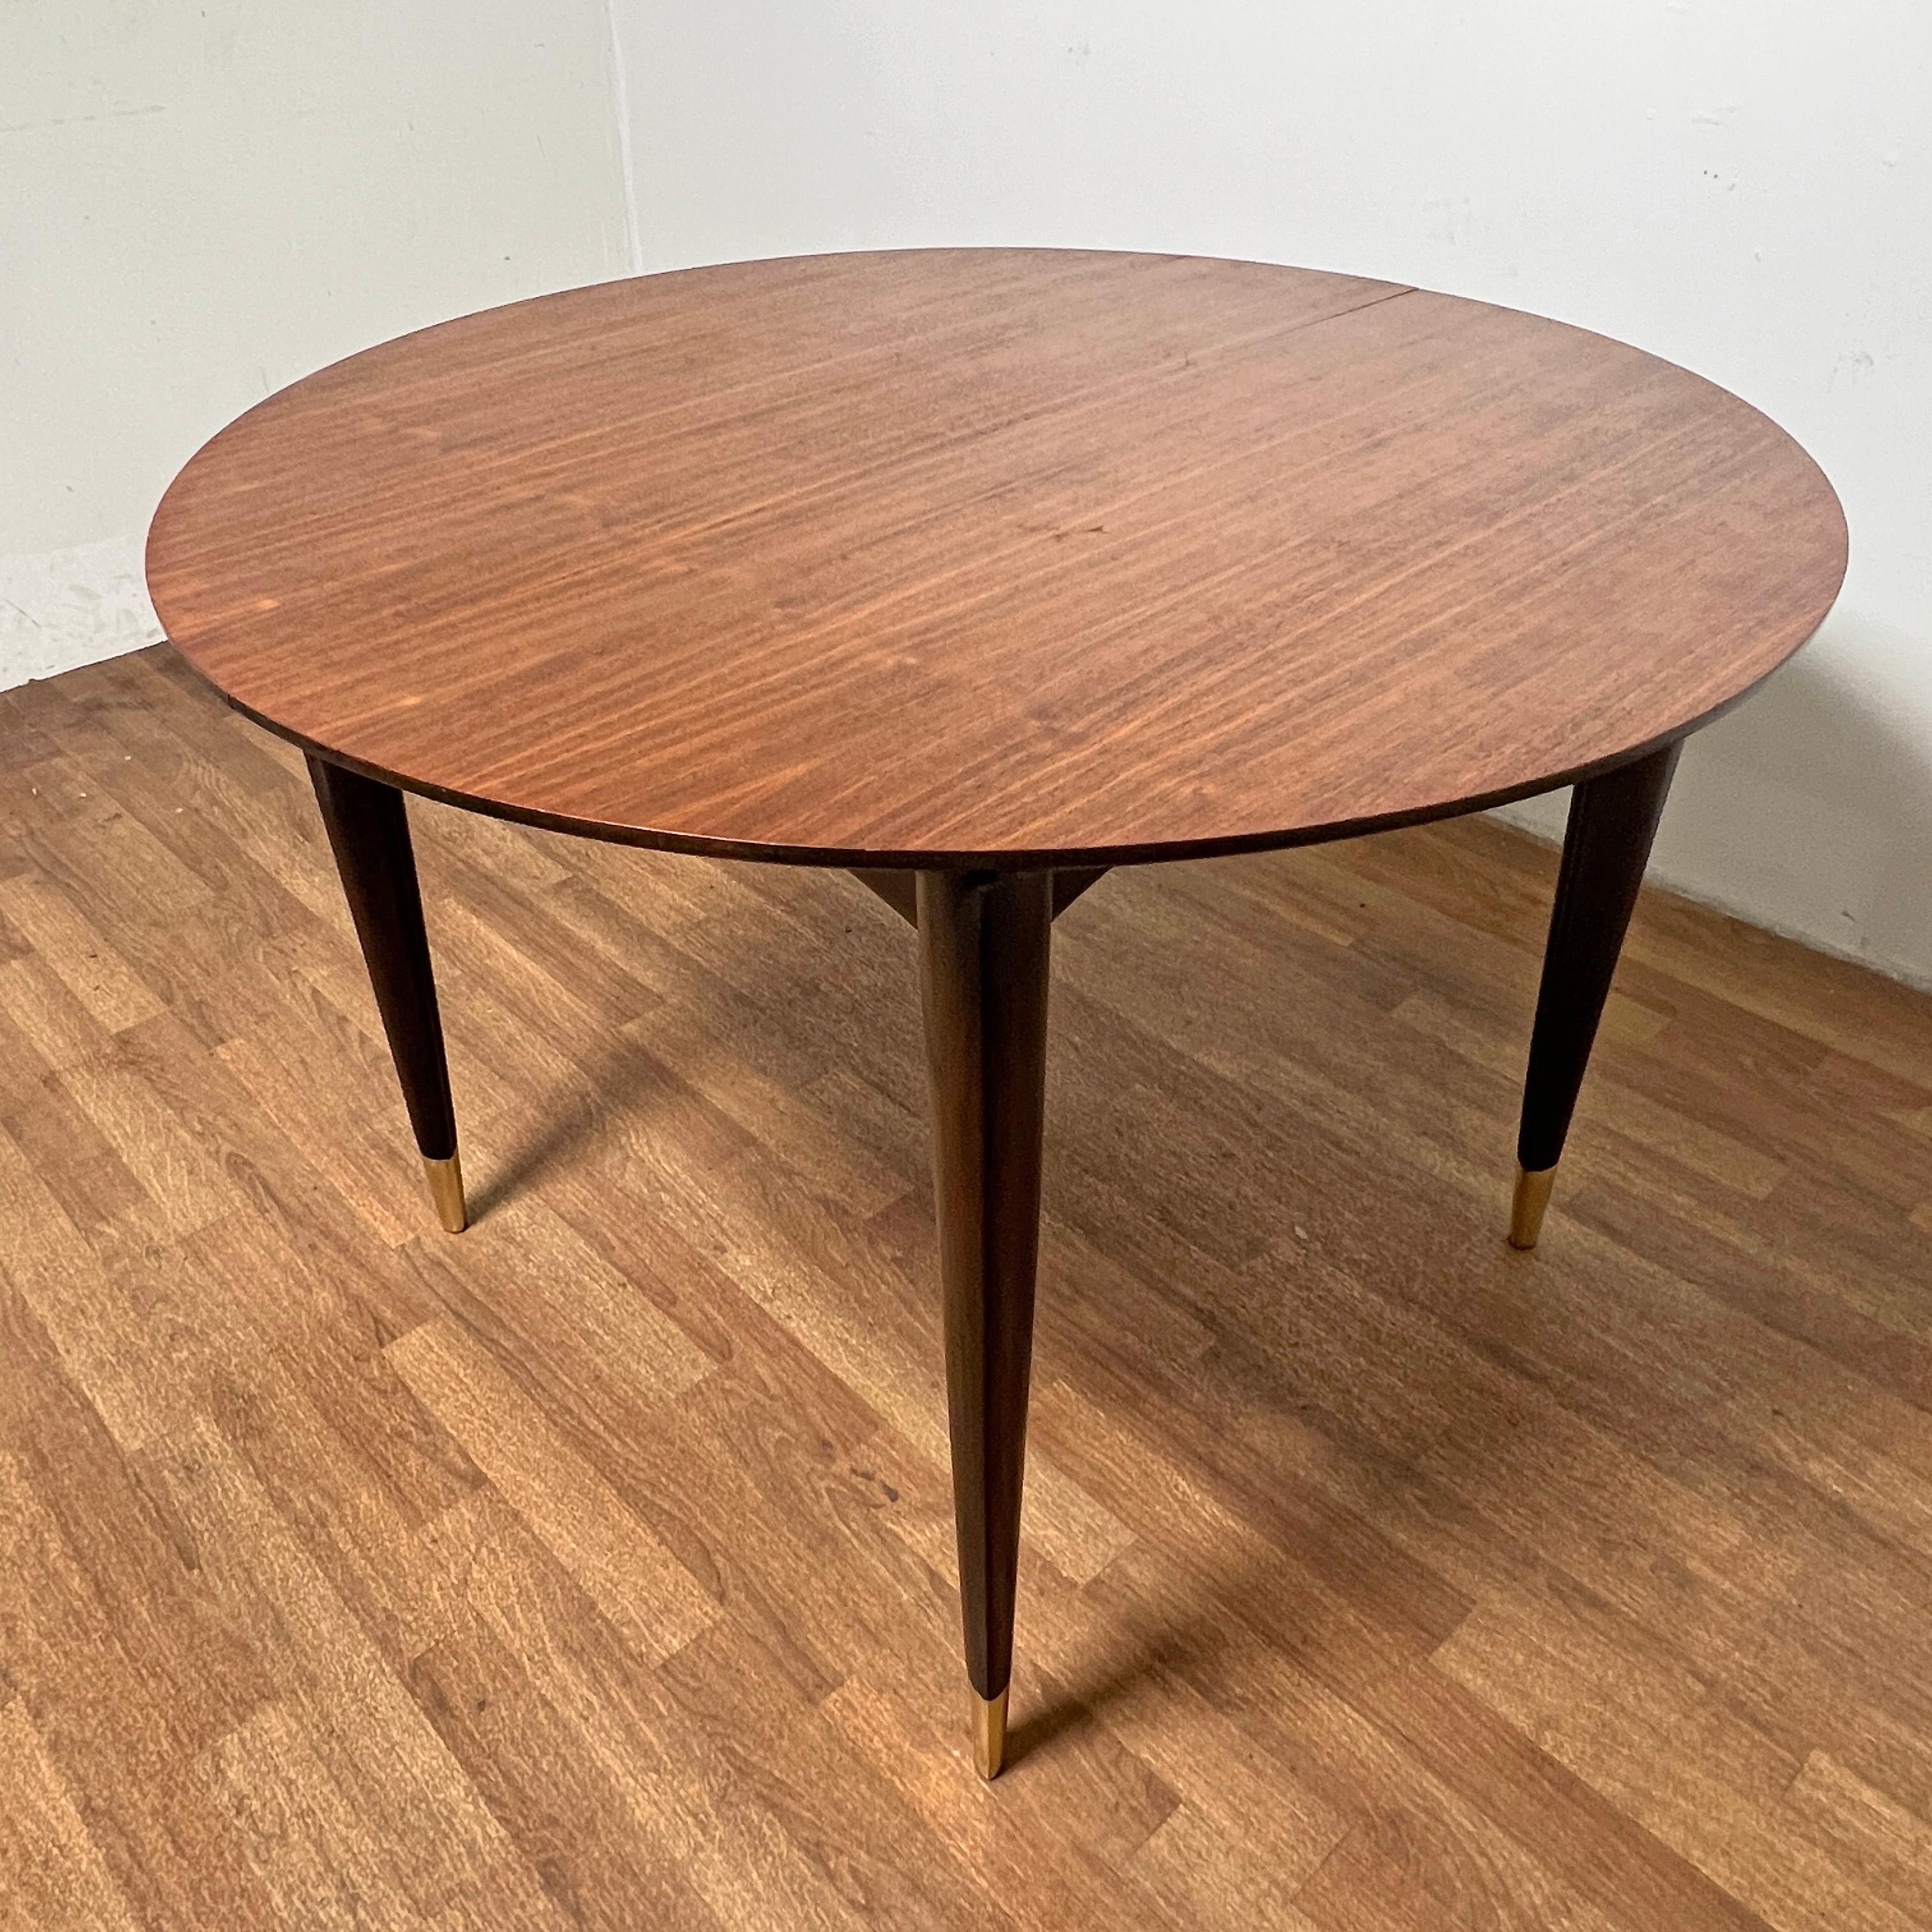 Gio Ponti for Singer Dining Table in Walnut With Brass Sabots Circa 1950s For Sale 3